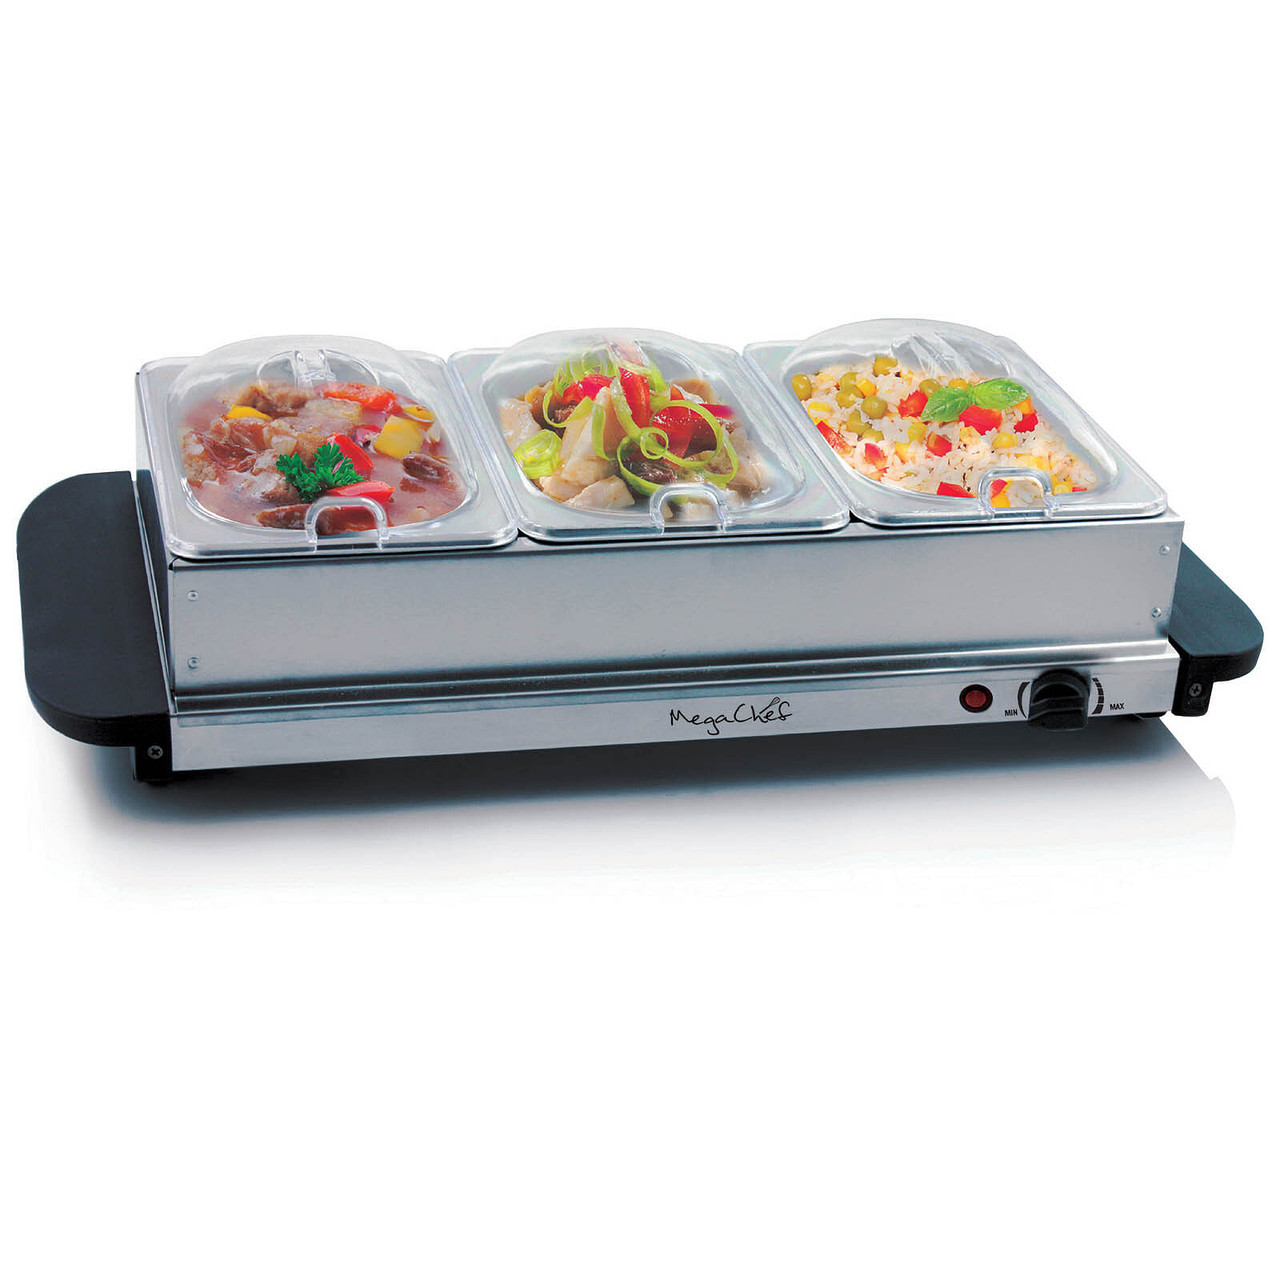 MegaChef Buffet Server & Food Warmer With 3 Removable Sectional Trays , Heated Warming Tray and Rem